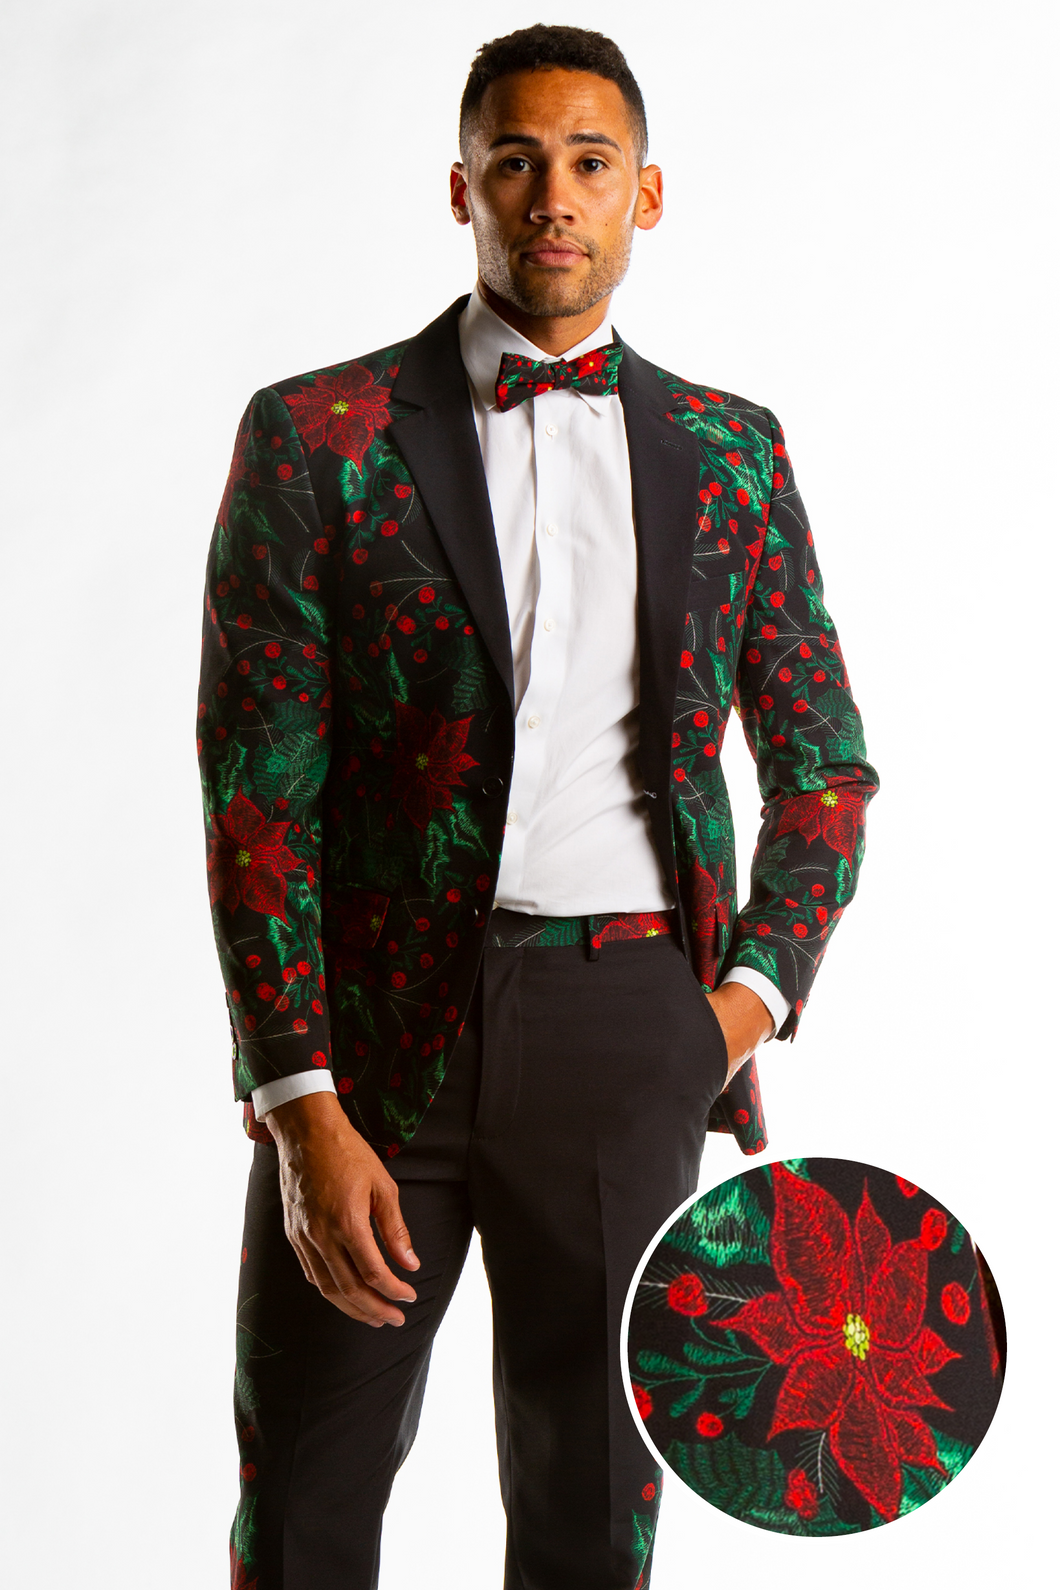 The Centerpiece | Poinsettia Ugly Christmas Suit